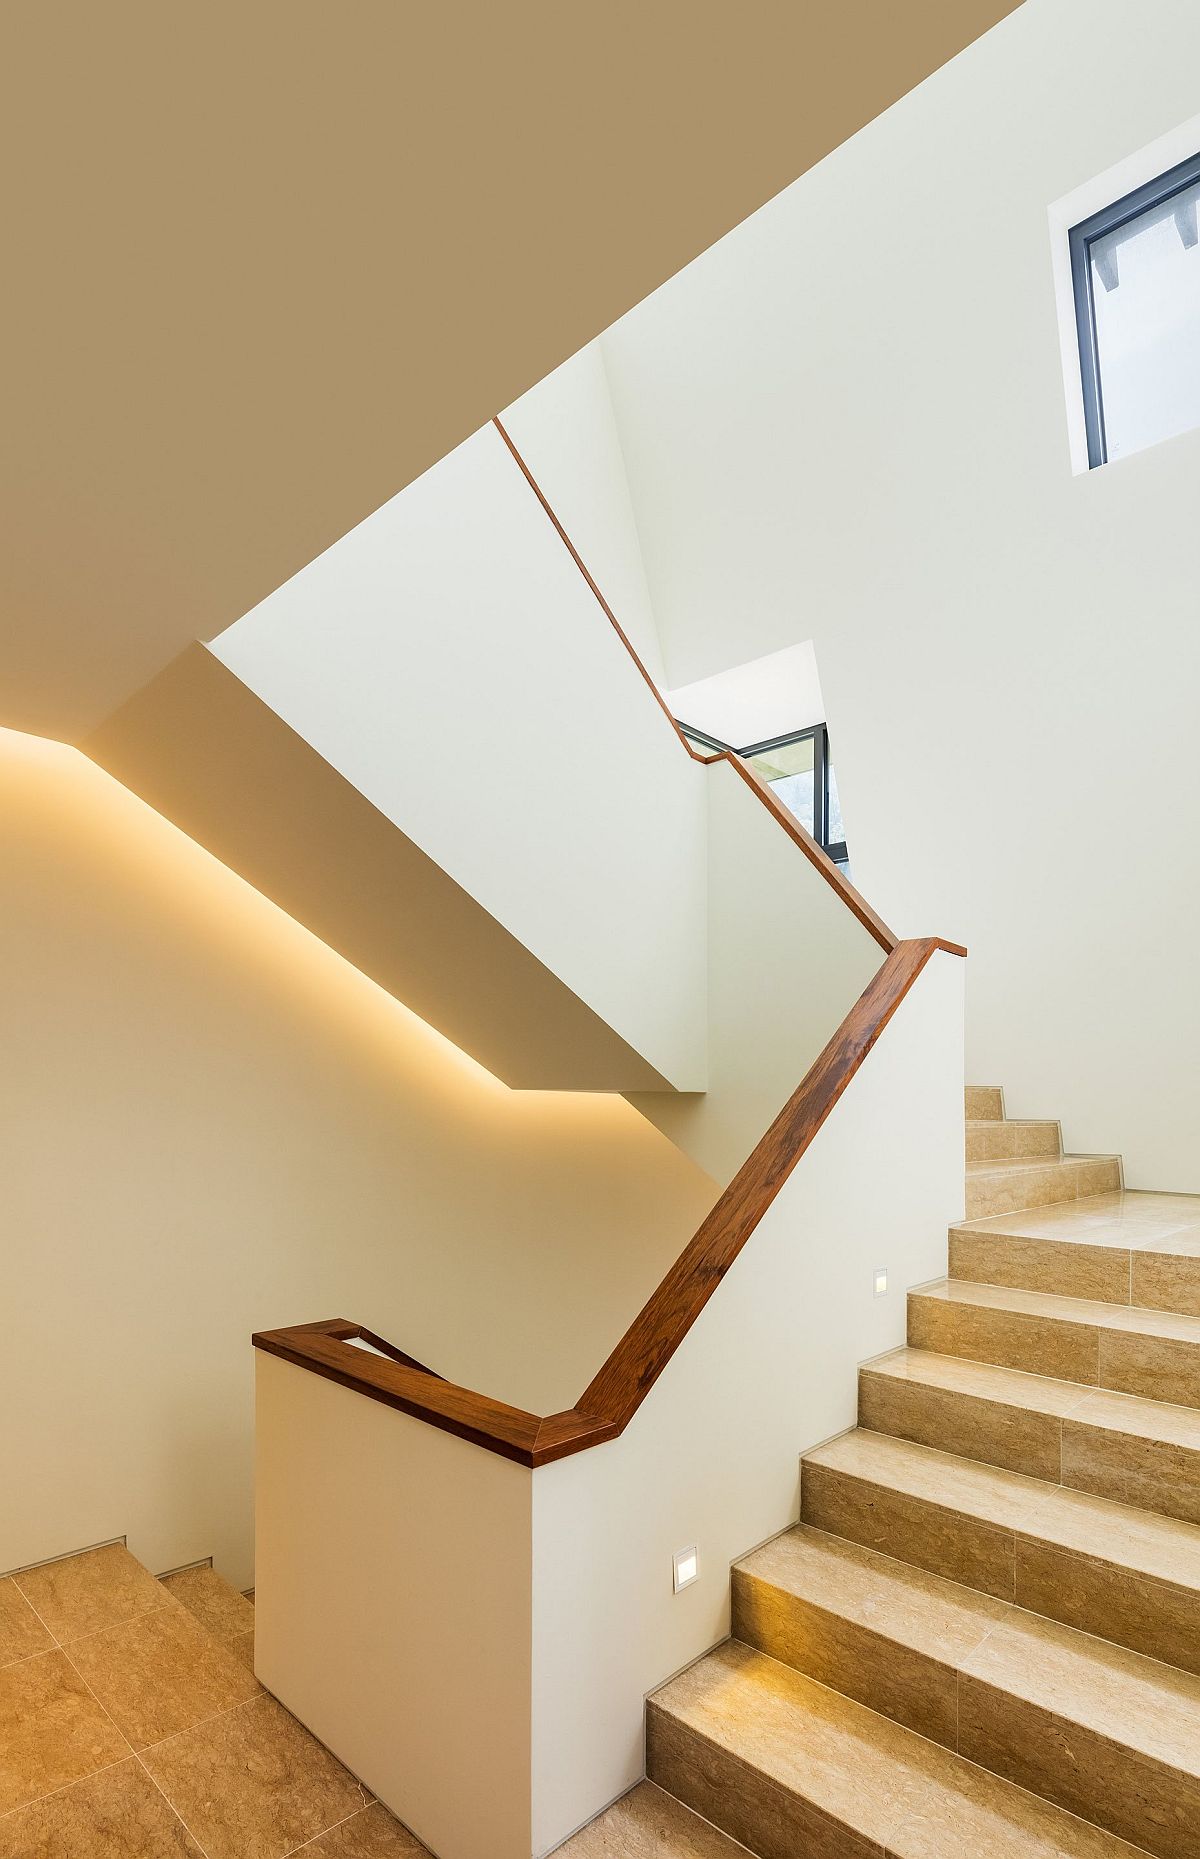 Stairway-connects-different-levels-of-the-modern-home